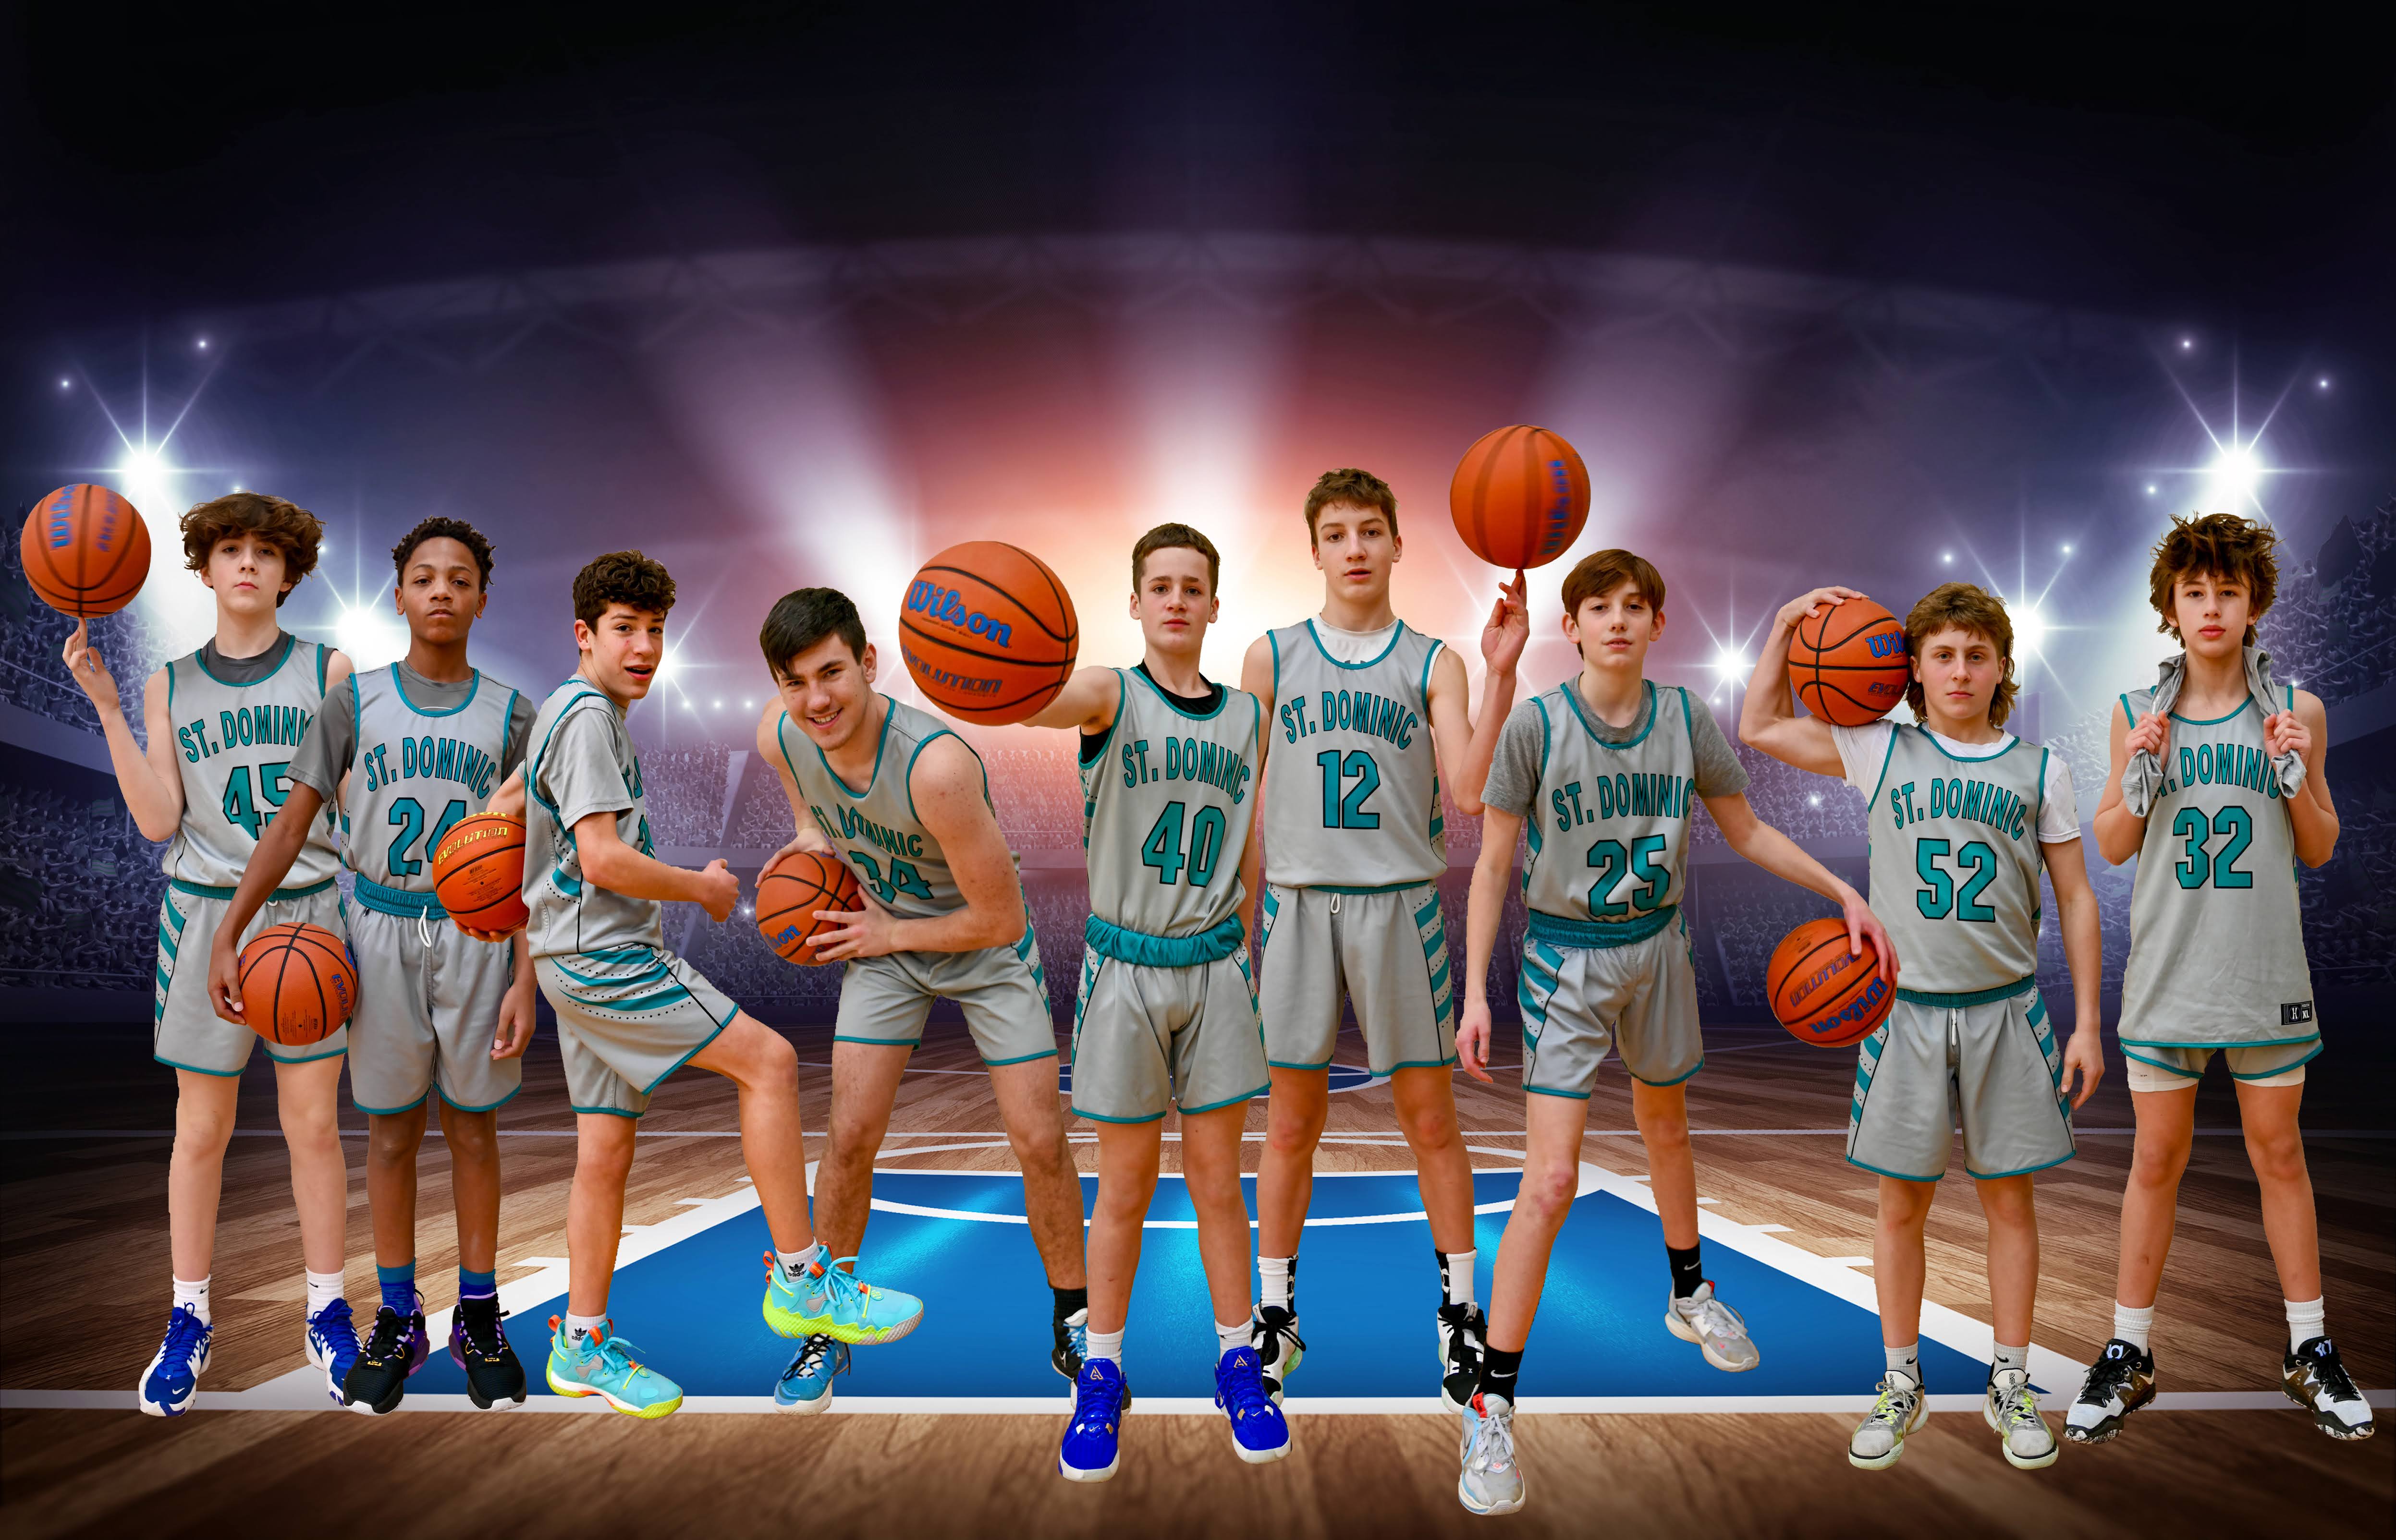 Boys - St. Dominic - 2023 Team Picture